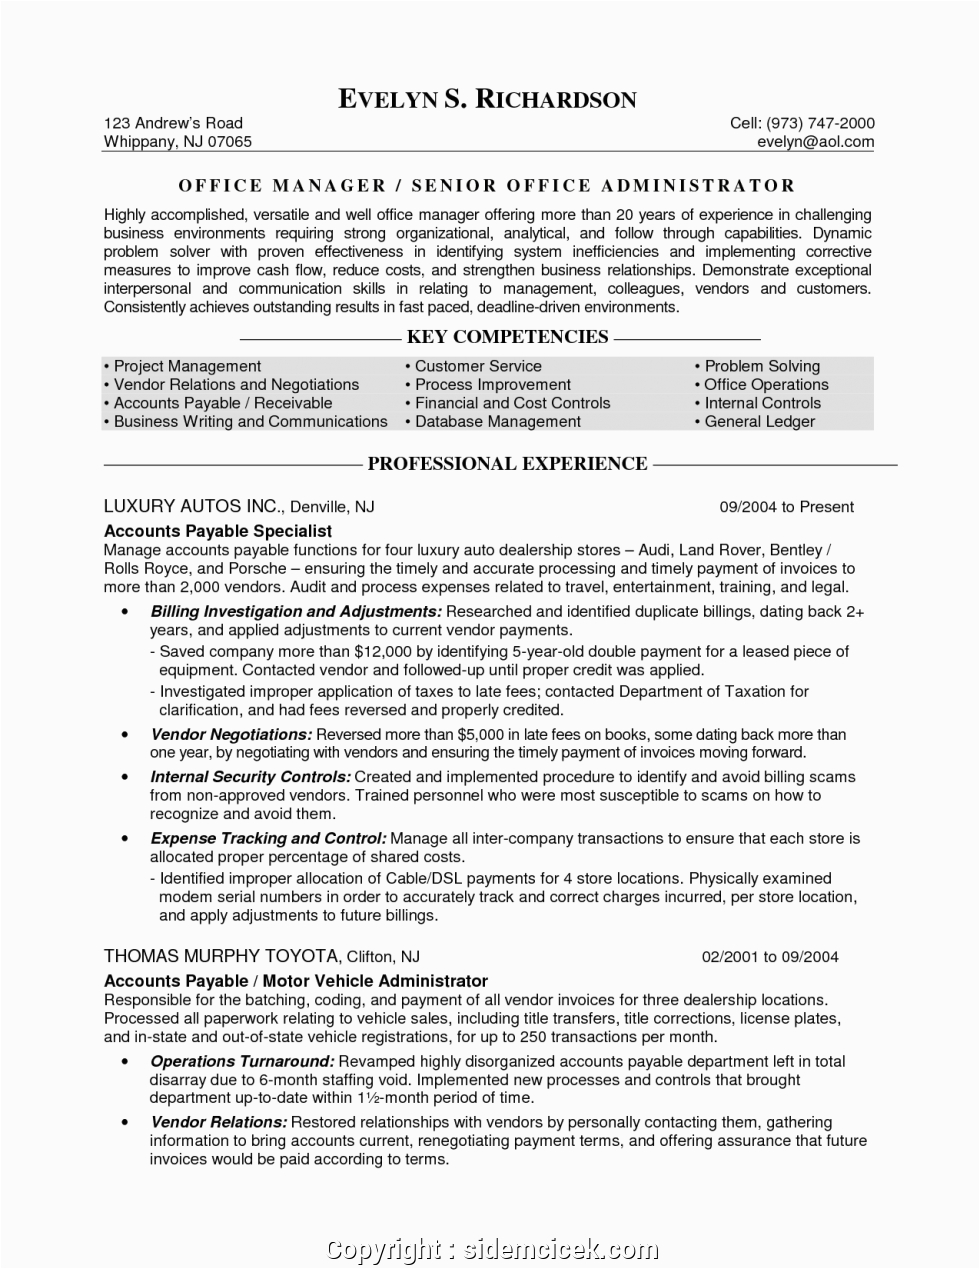 Law Firm Office Manager Resume Sample Create Law Firm Fice Manager Resume Pleasing Law Firm